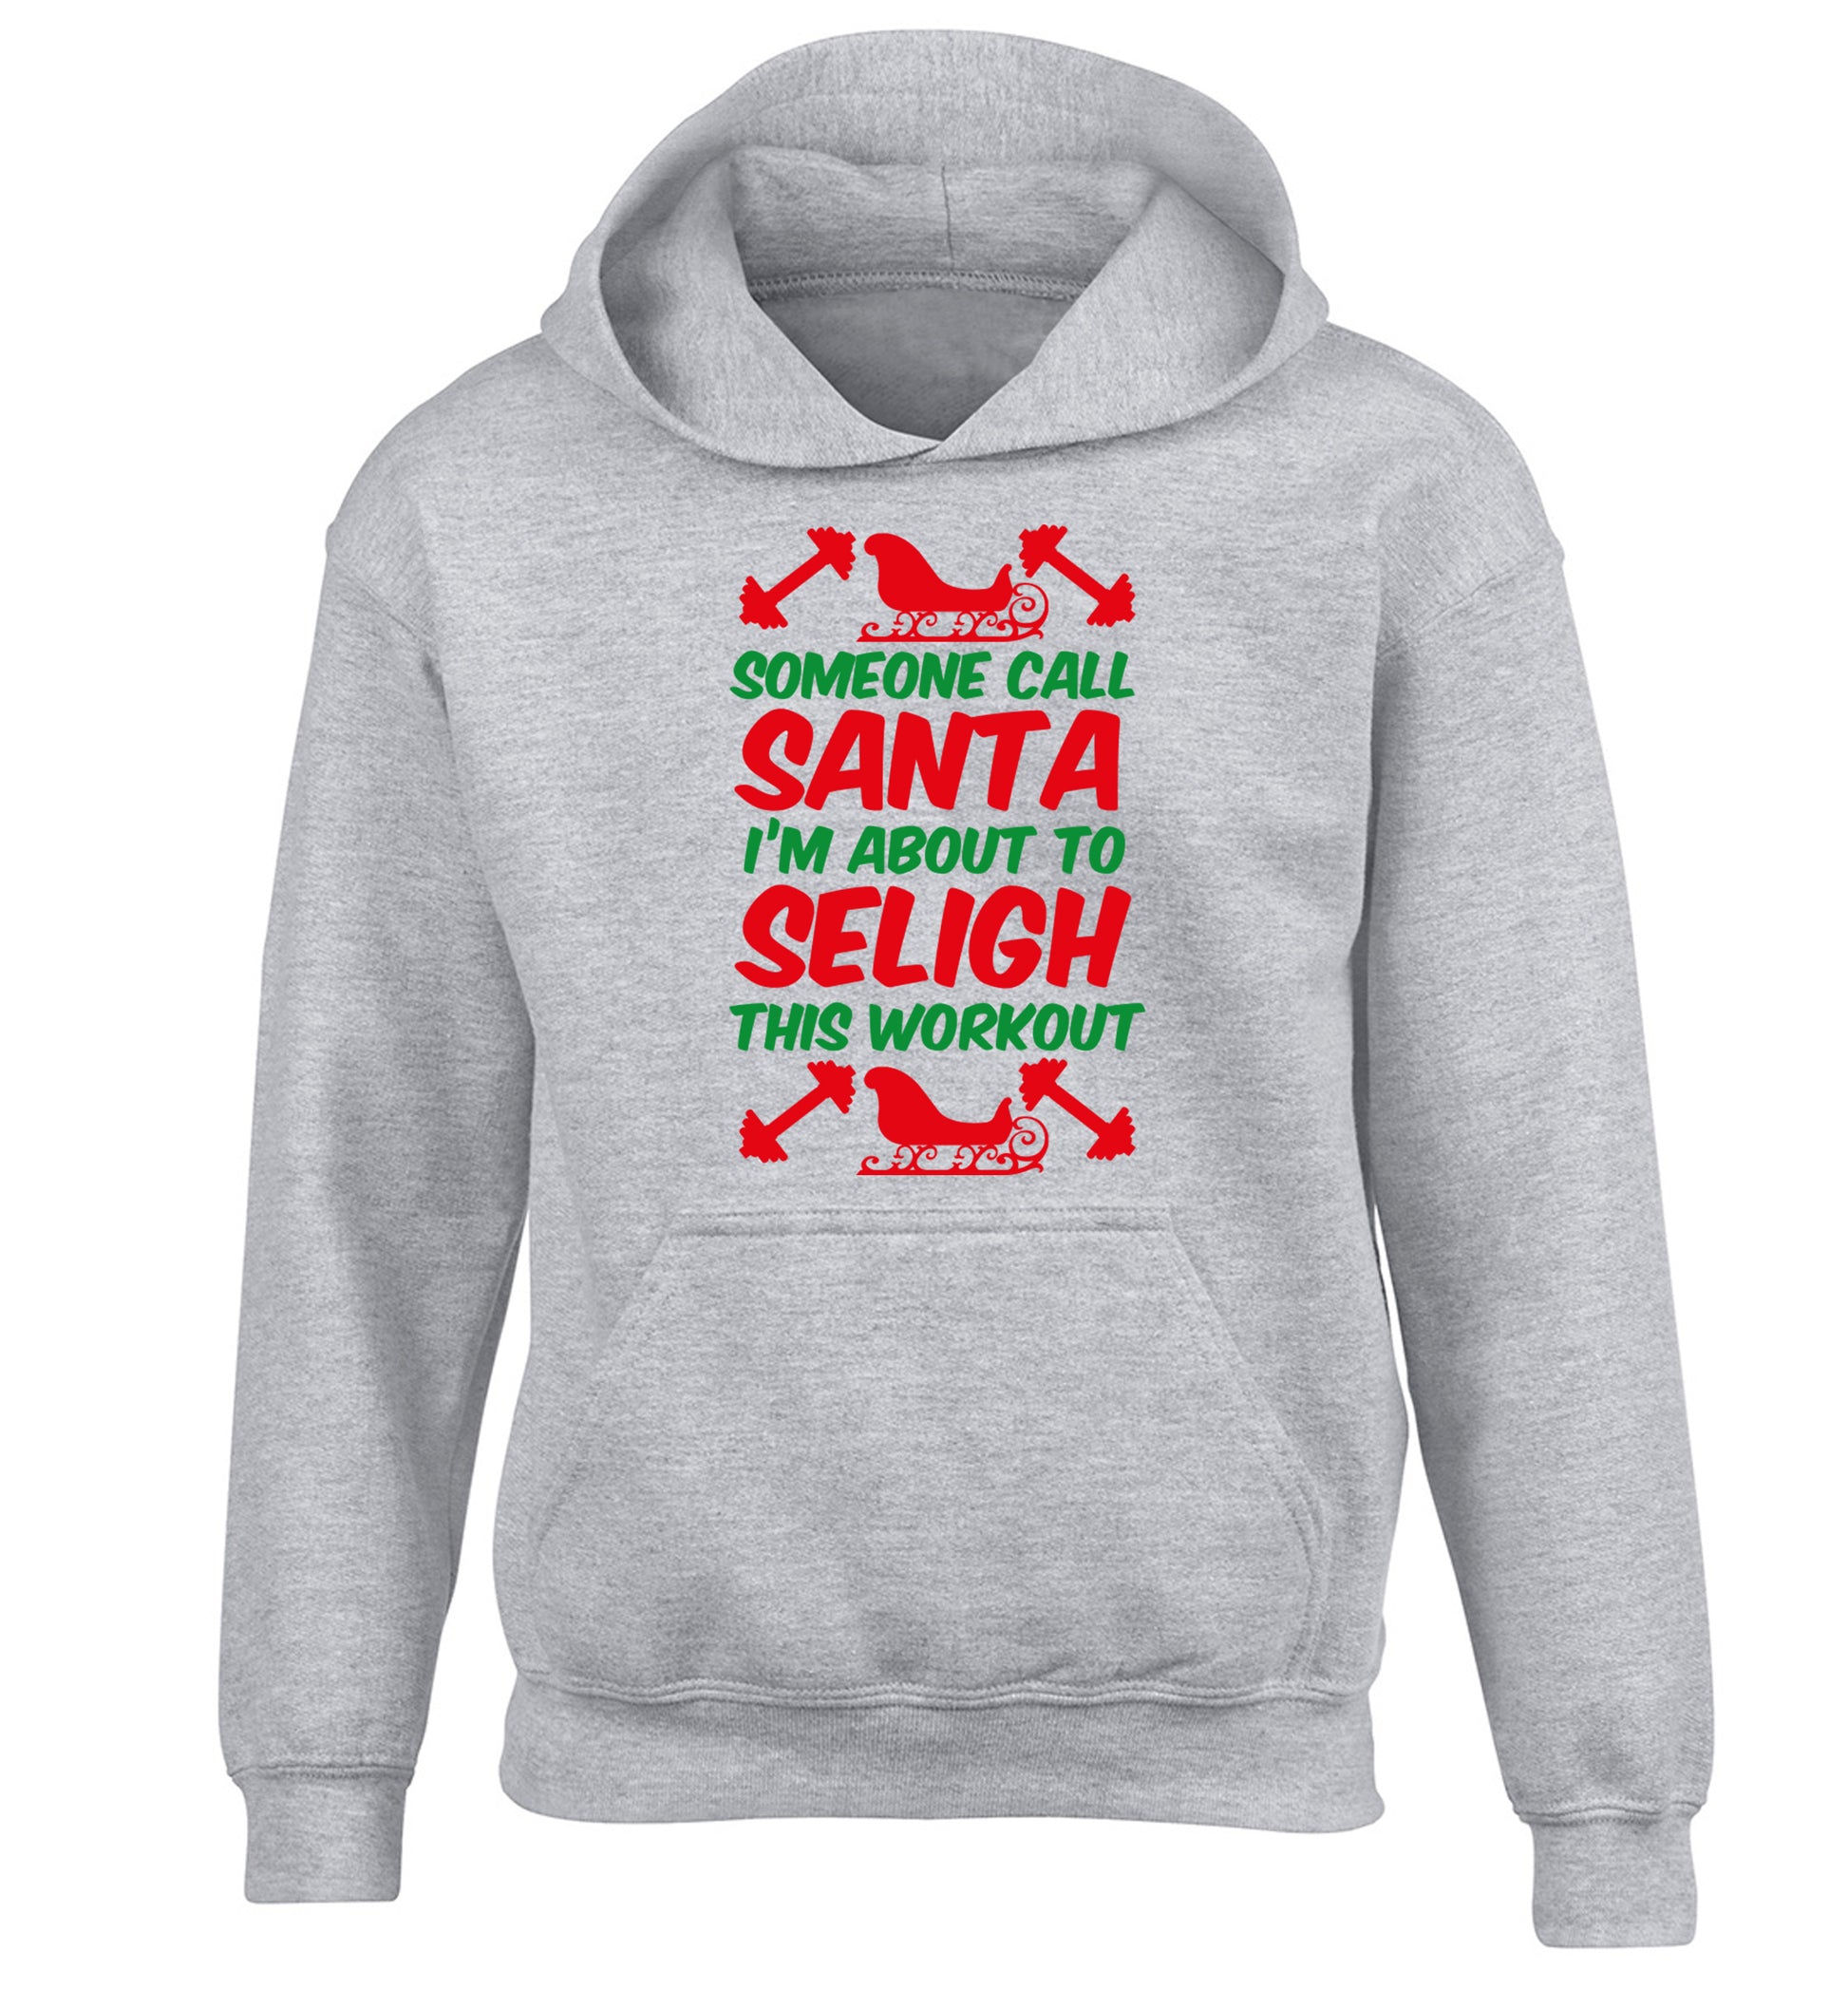 Someone call santa, I'm about to sleigh this workout children's grey hoodie 12-14 Years